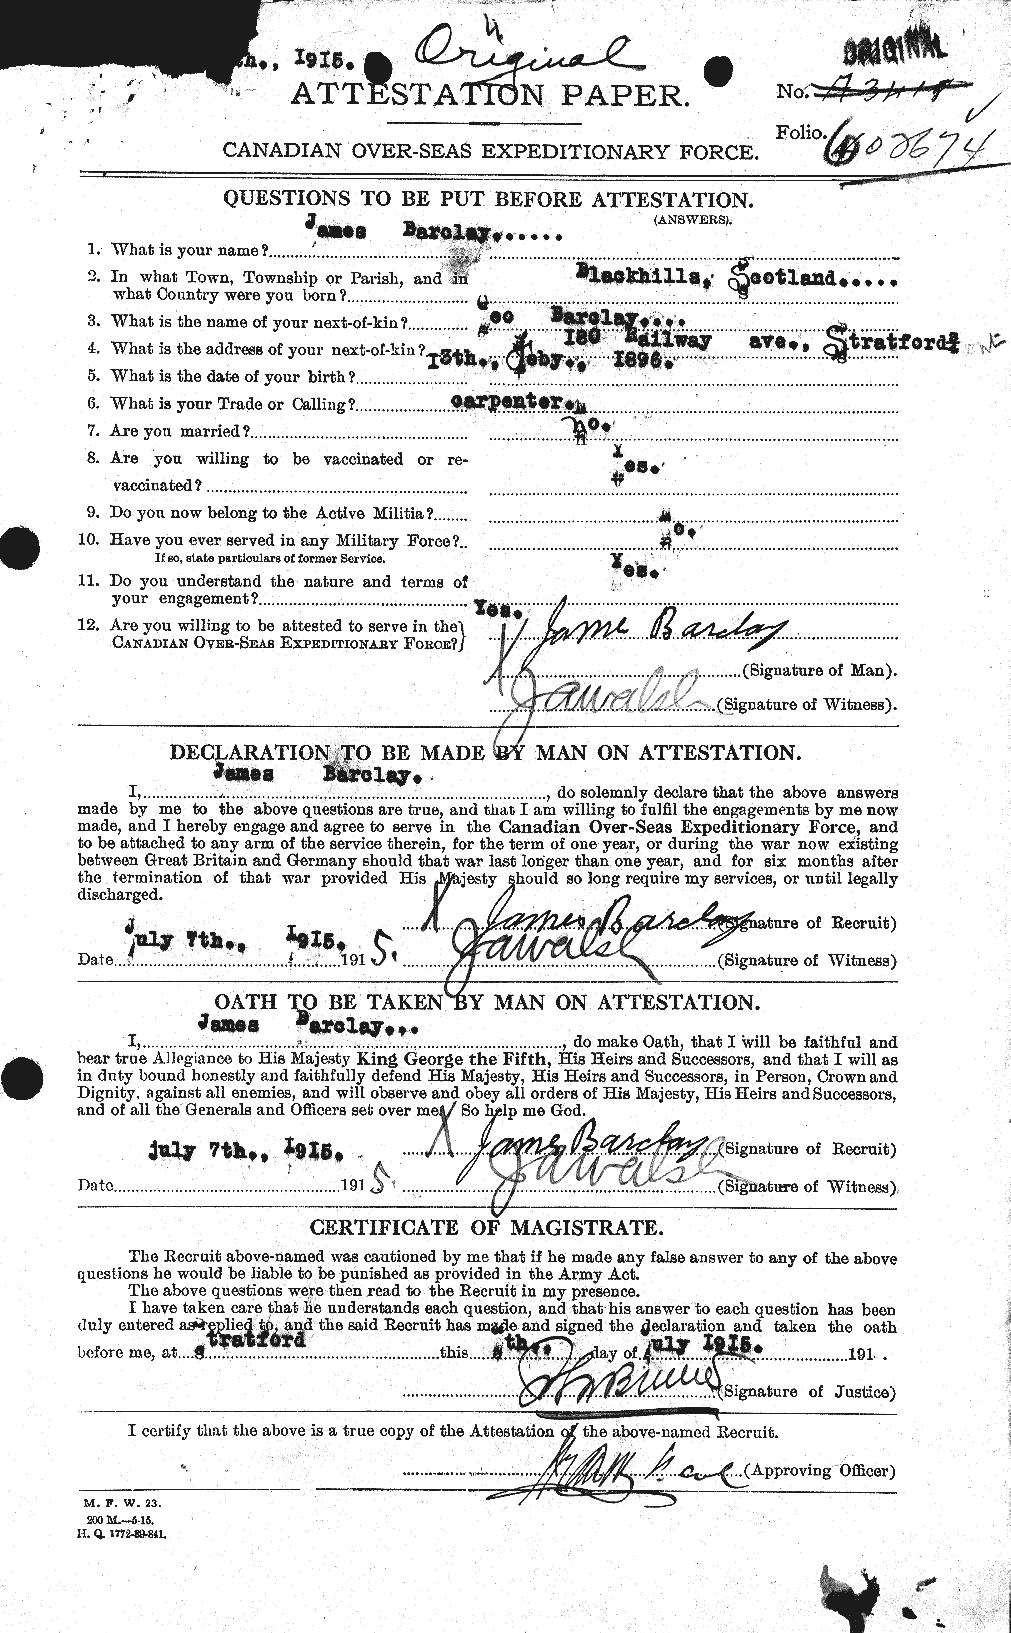 Personnel Records of the First World War - CEF 220907a